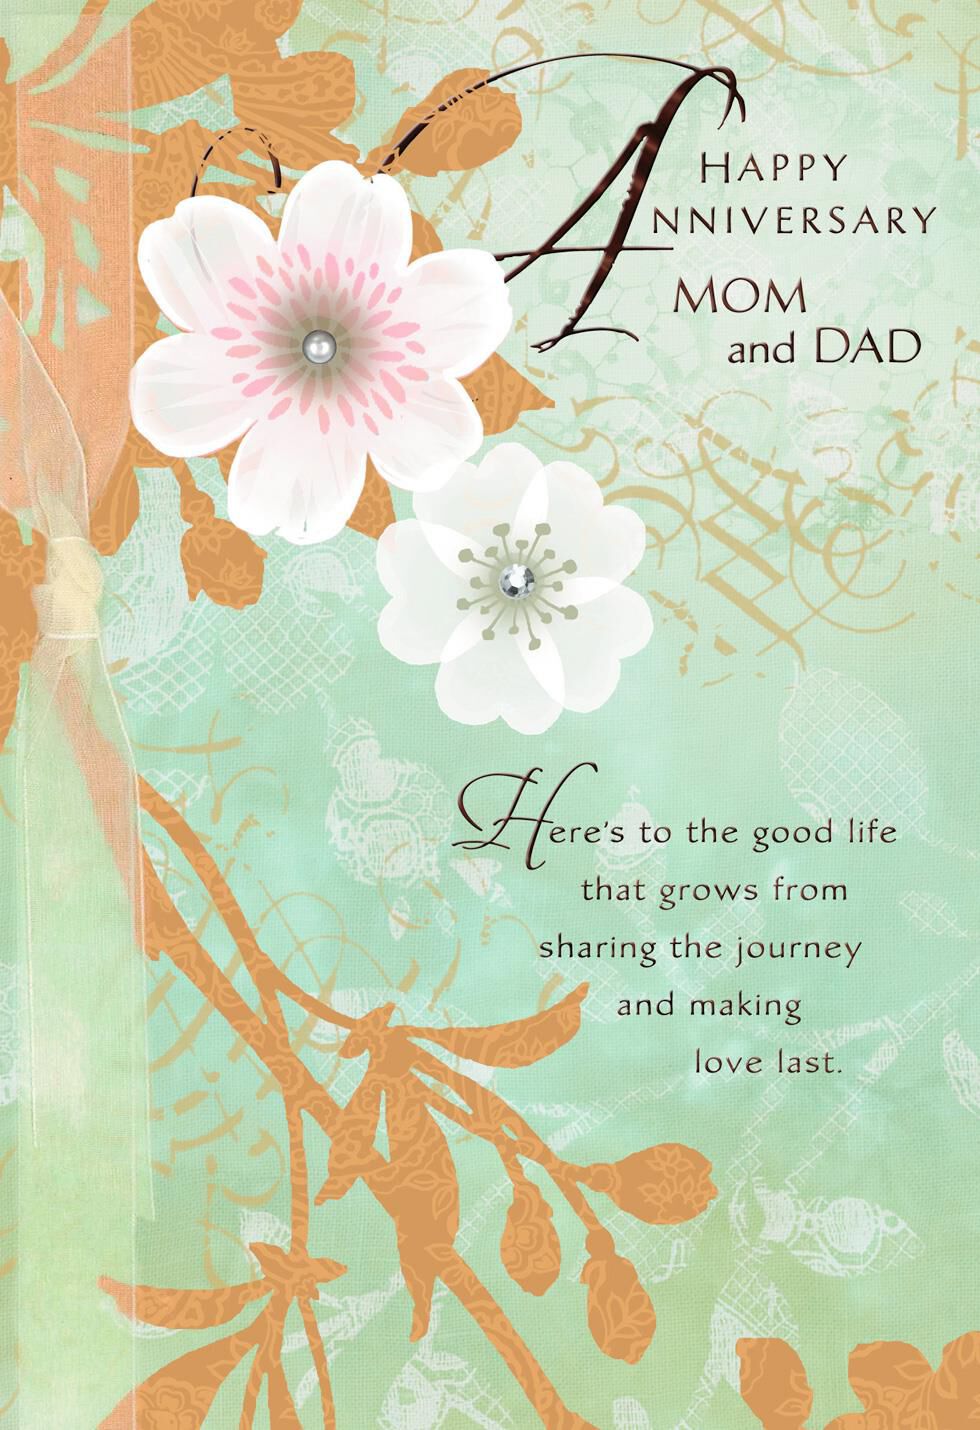 A Beautiful Example Anniversary Card for Parents - Greeting Cards